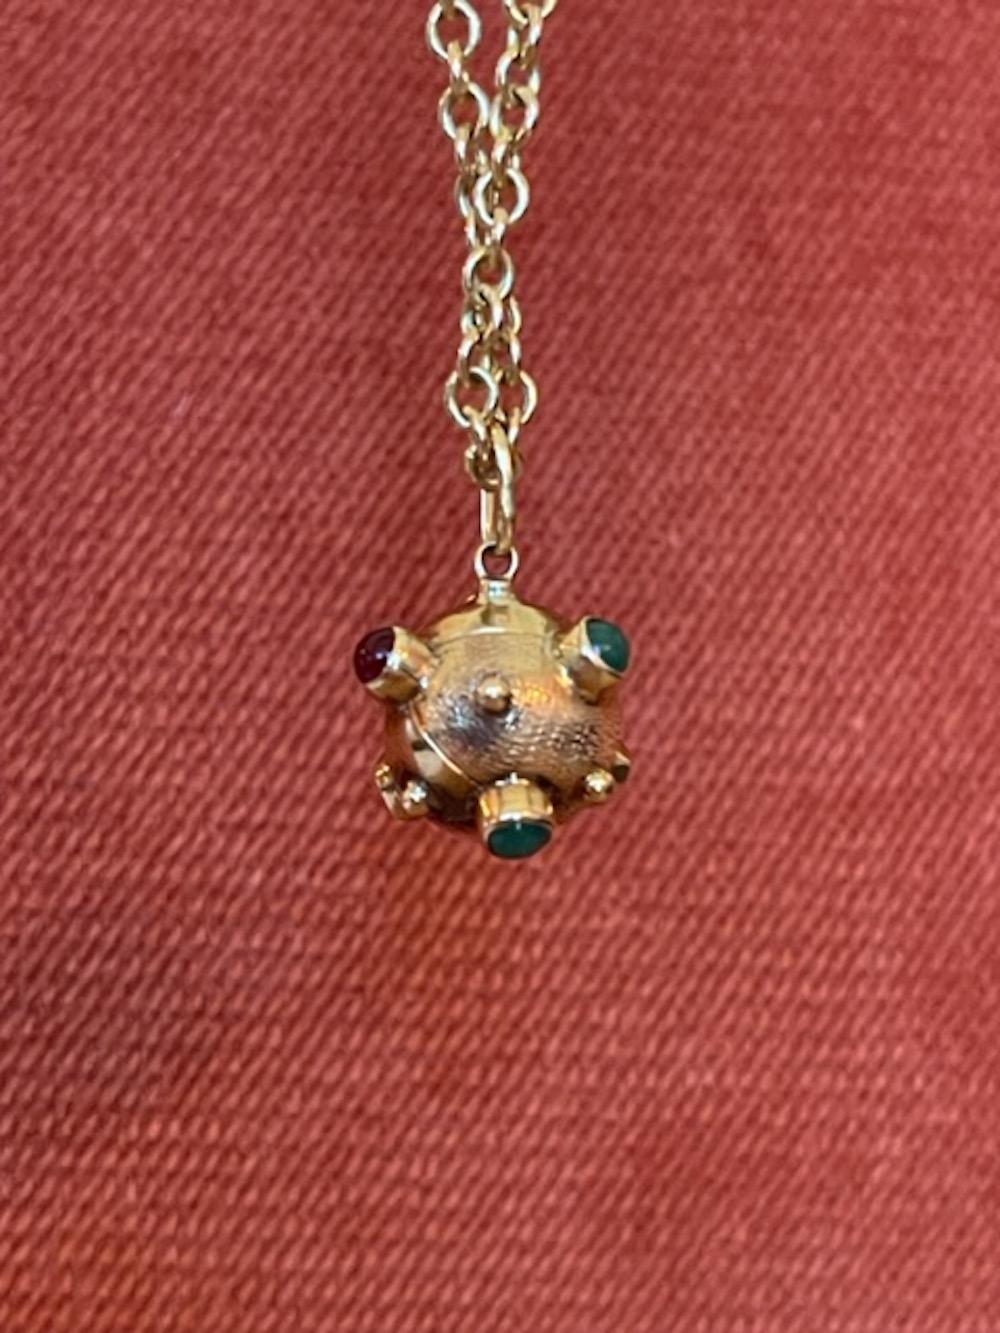 Vintage 18k yellow gold highly coveted Sputnik Charm set with ruby and emerald cabochons in fabulous condition. 

Whether called a sputnik orb, sphere or globe charm, these round 3-dimensional ornate ball charms are highly collectible. 

We love